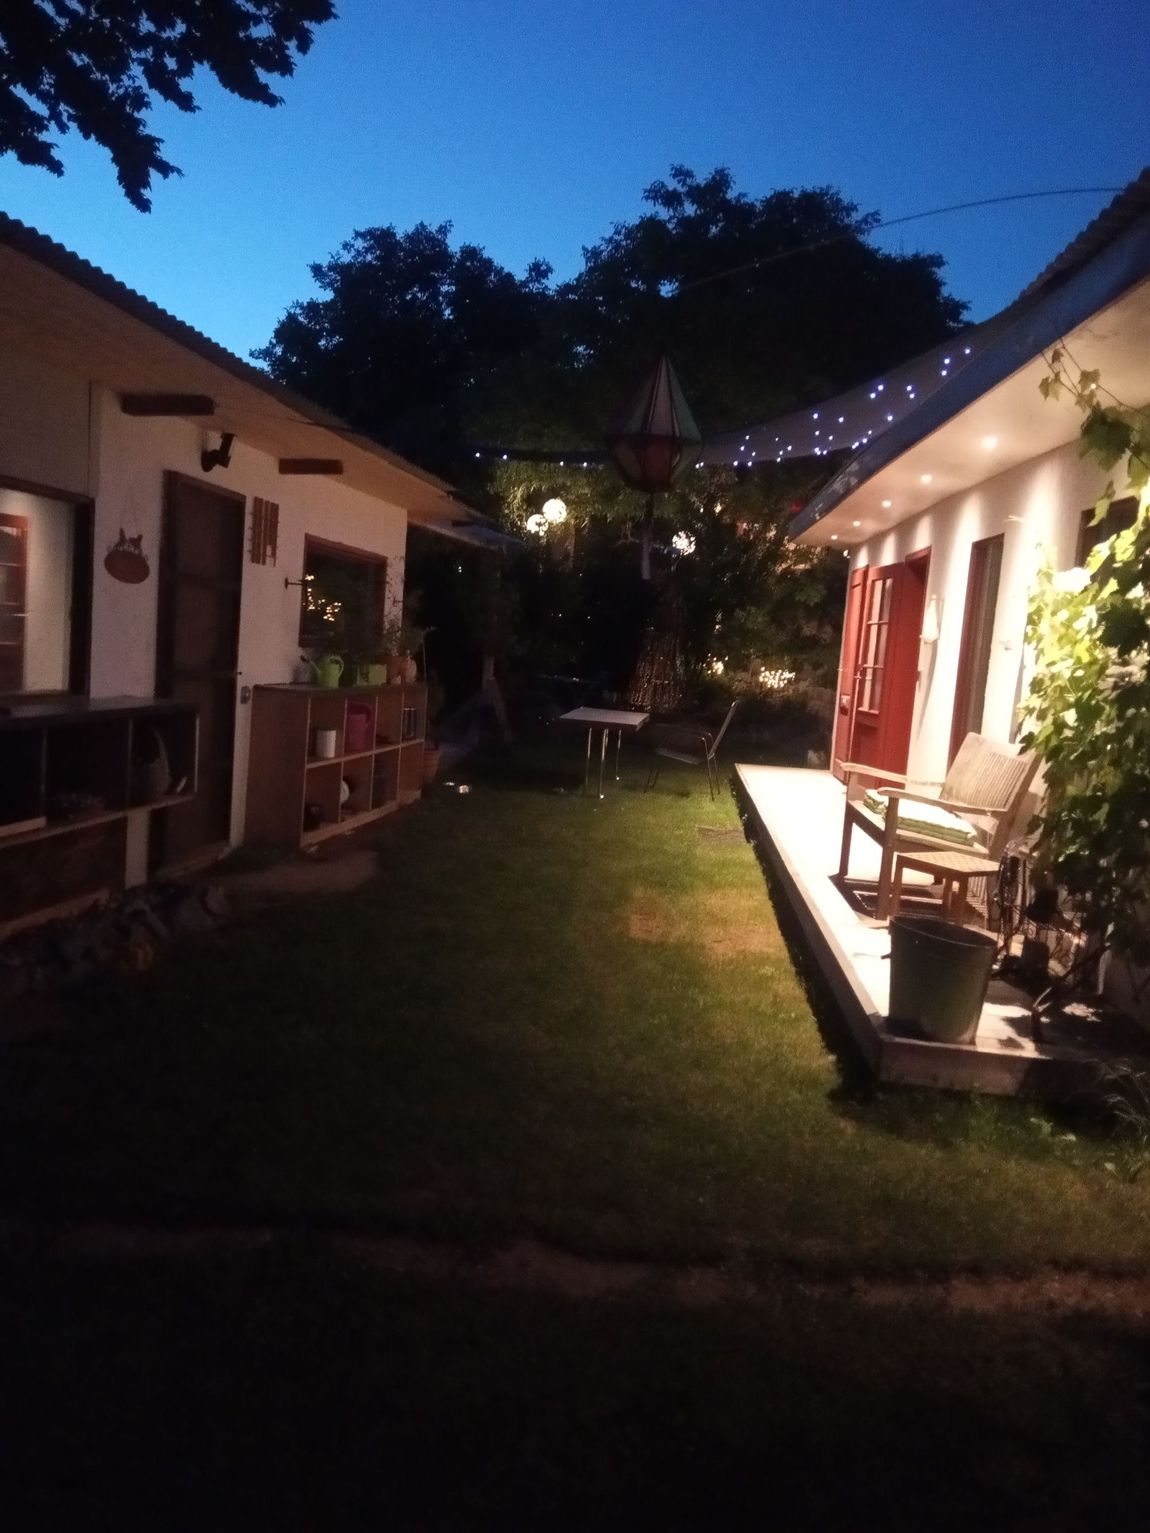 Vacation in our garden in the hinterland of Lake Constance